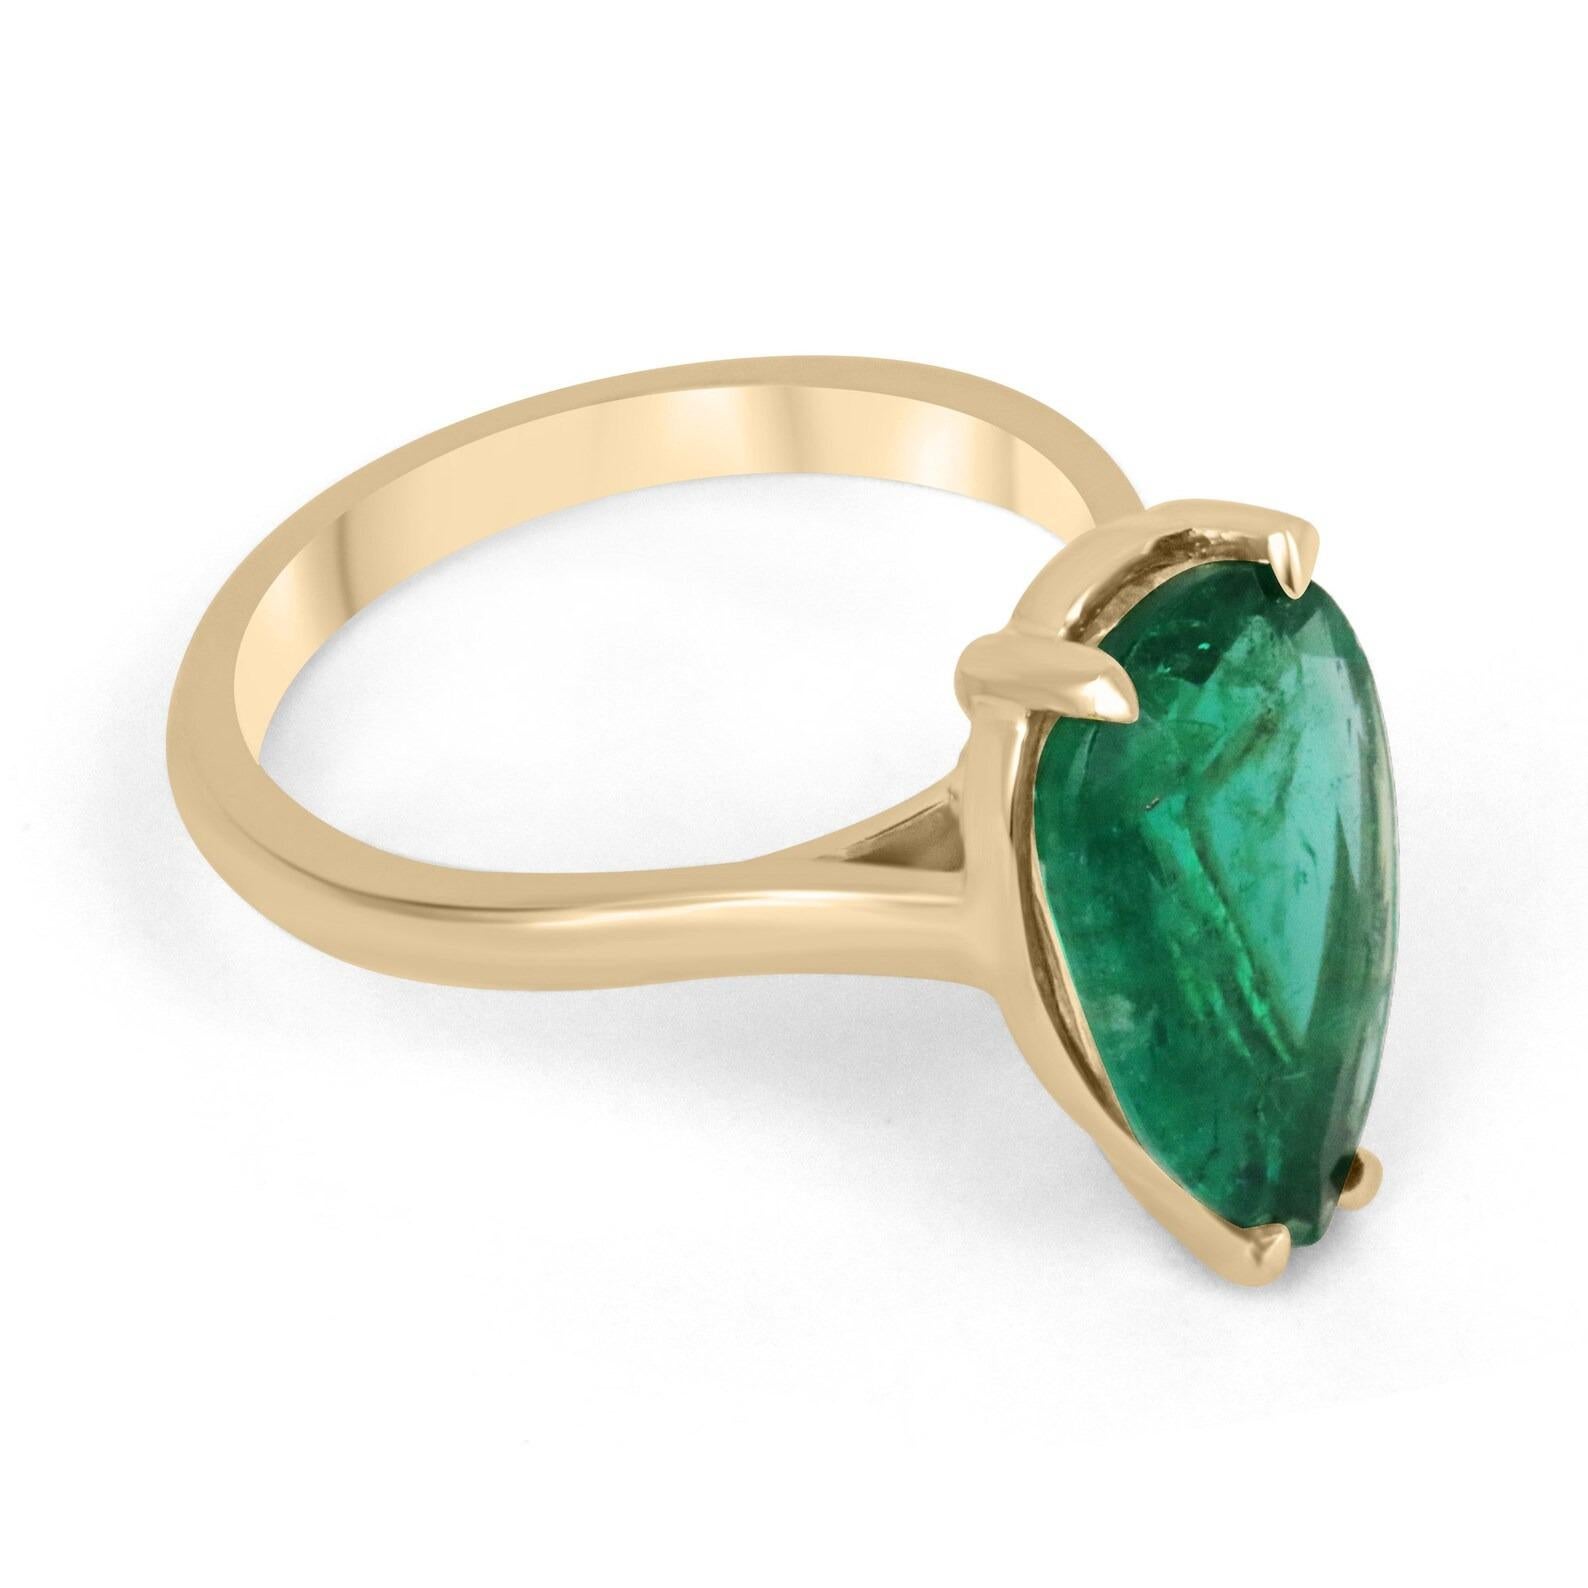 You have stumbled upon an absolute treasure, to say the very least. This remarkable solitaire emerald ring is one of one. Showcased is a ravishing natural pear cut emerald that displays the most vivacious rich green color and superb characteristics.